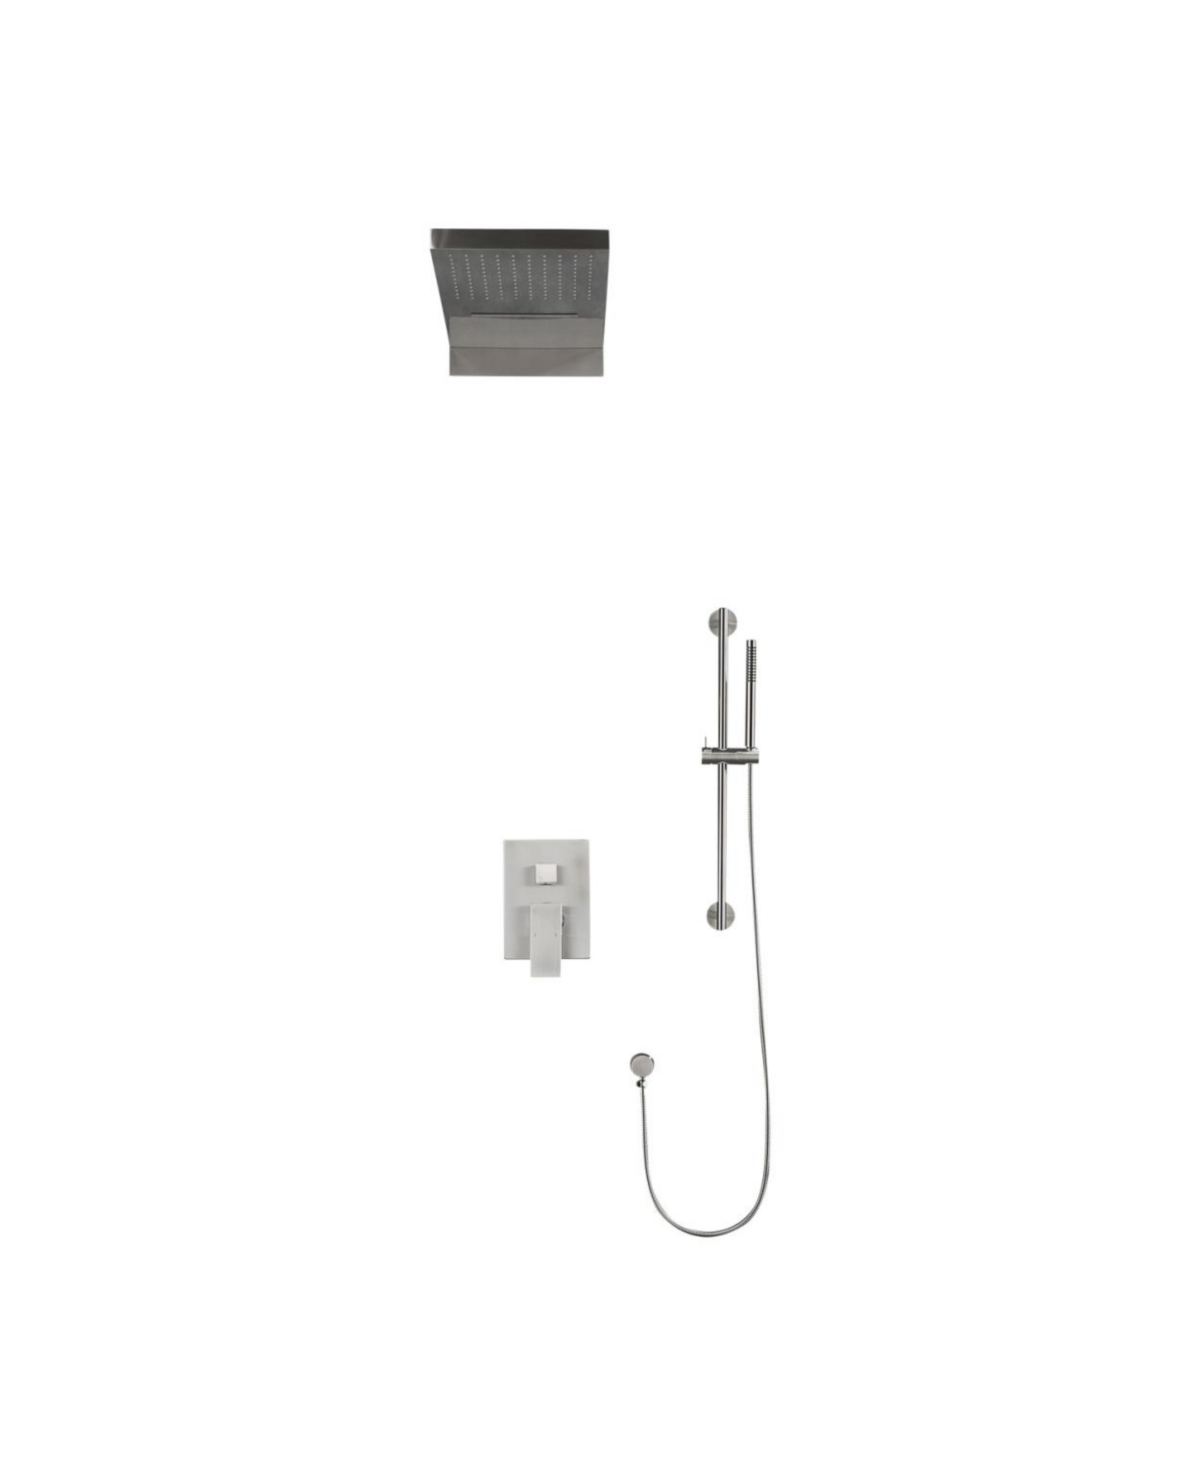 Bathroom Wall Mounted Shower Faucet Set - Silver